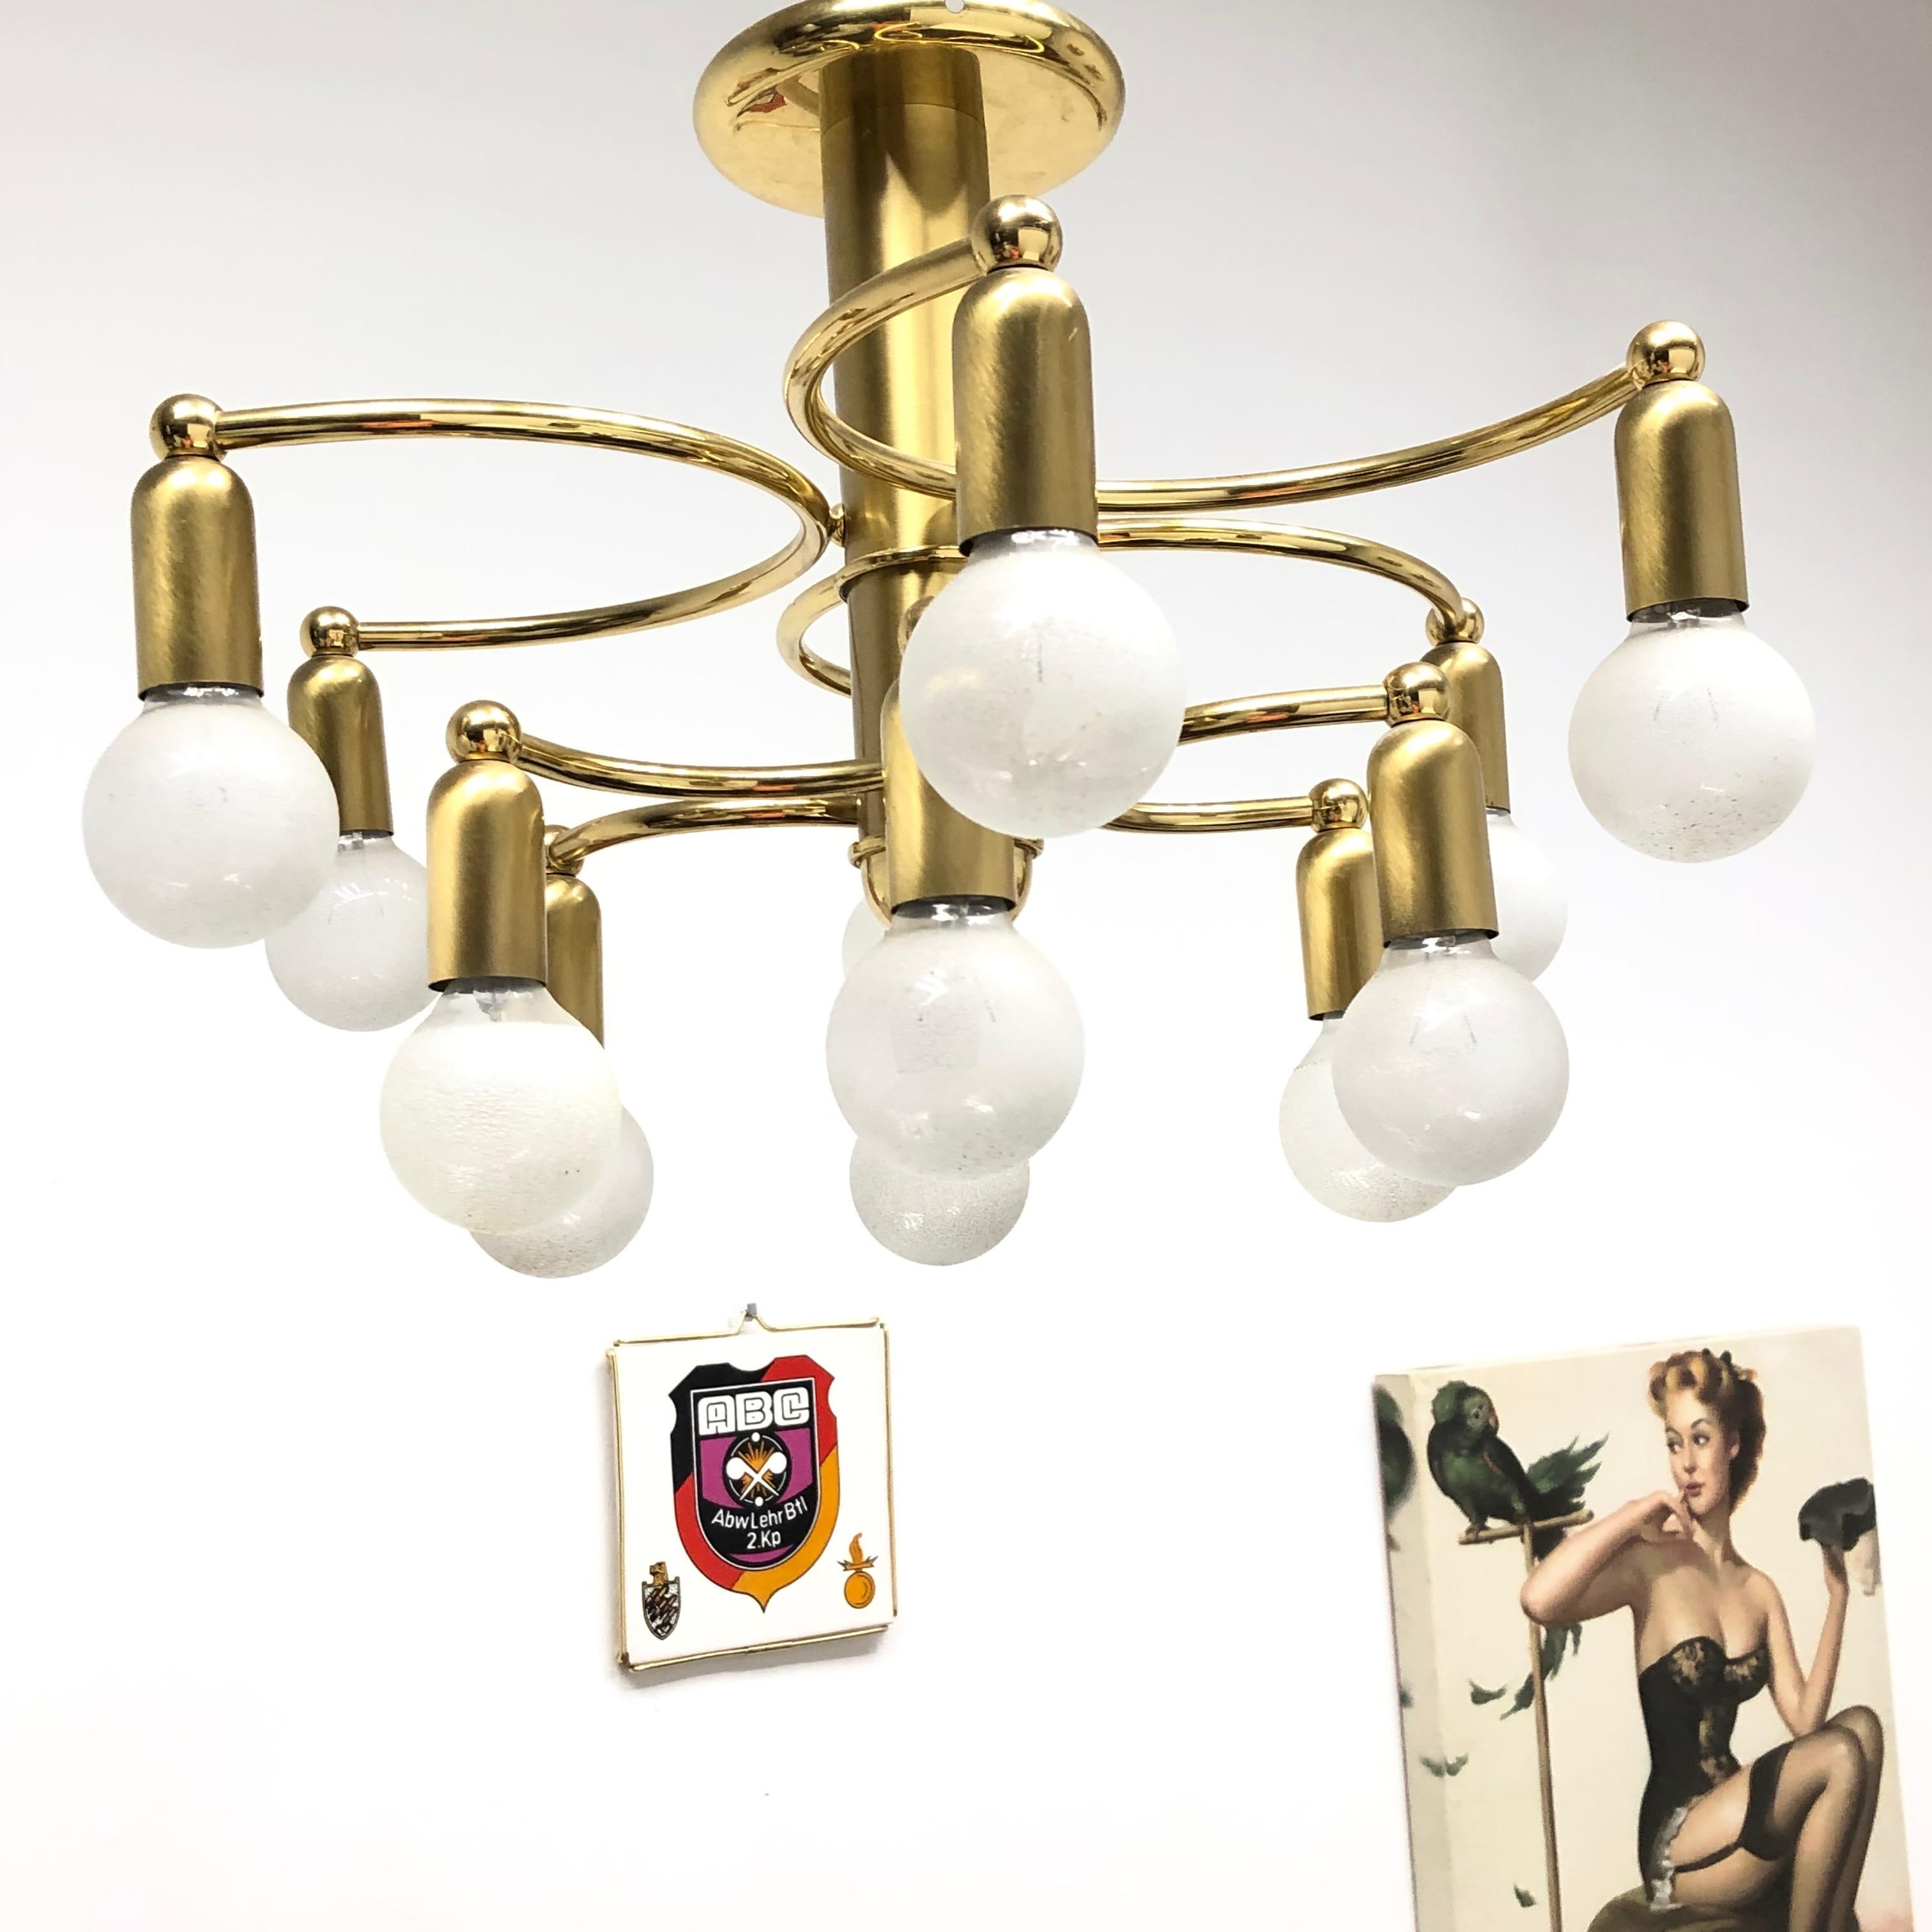 A gorgeous brass flush mount by Hufnagel Leuchten. It can be used also as a sconce. The light fixture requires twelve European E14 candelabra bulbs, each up to 40 watts. It measures approximate 11